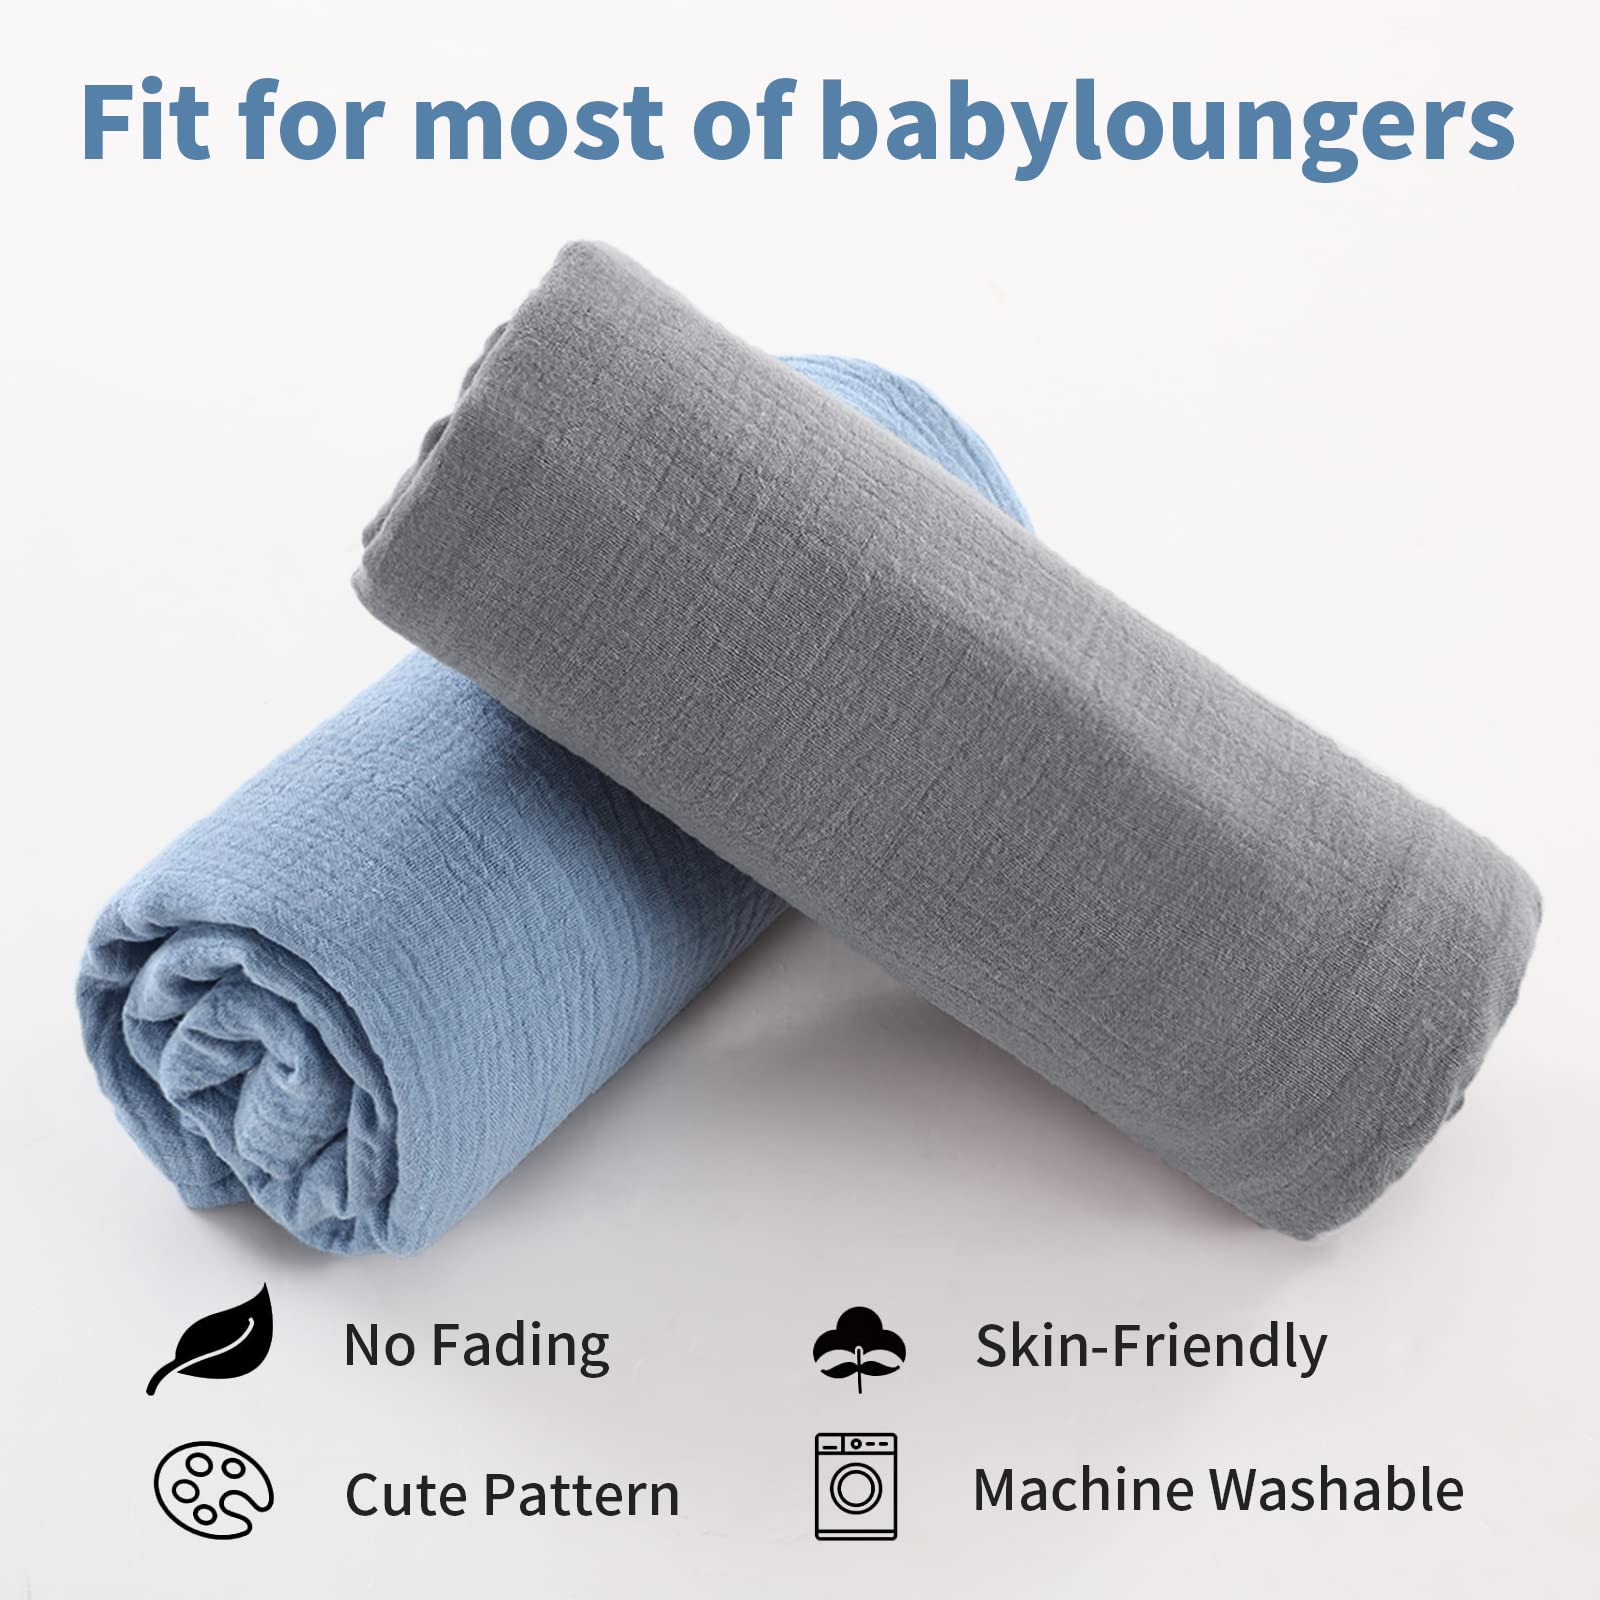 HOMBYS Muslin Baby Lounger Cover 2 Pack for Newborn, 100% Cotton Lounger Slipcover, Ultra Soft Removable Cover for Infant Lounger Pillow (Blue & Grey)